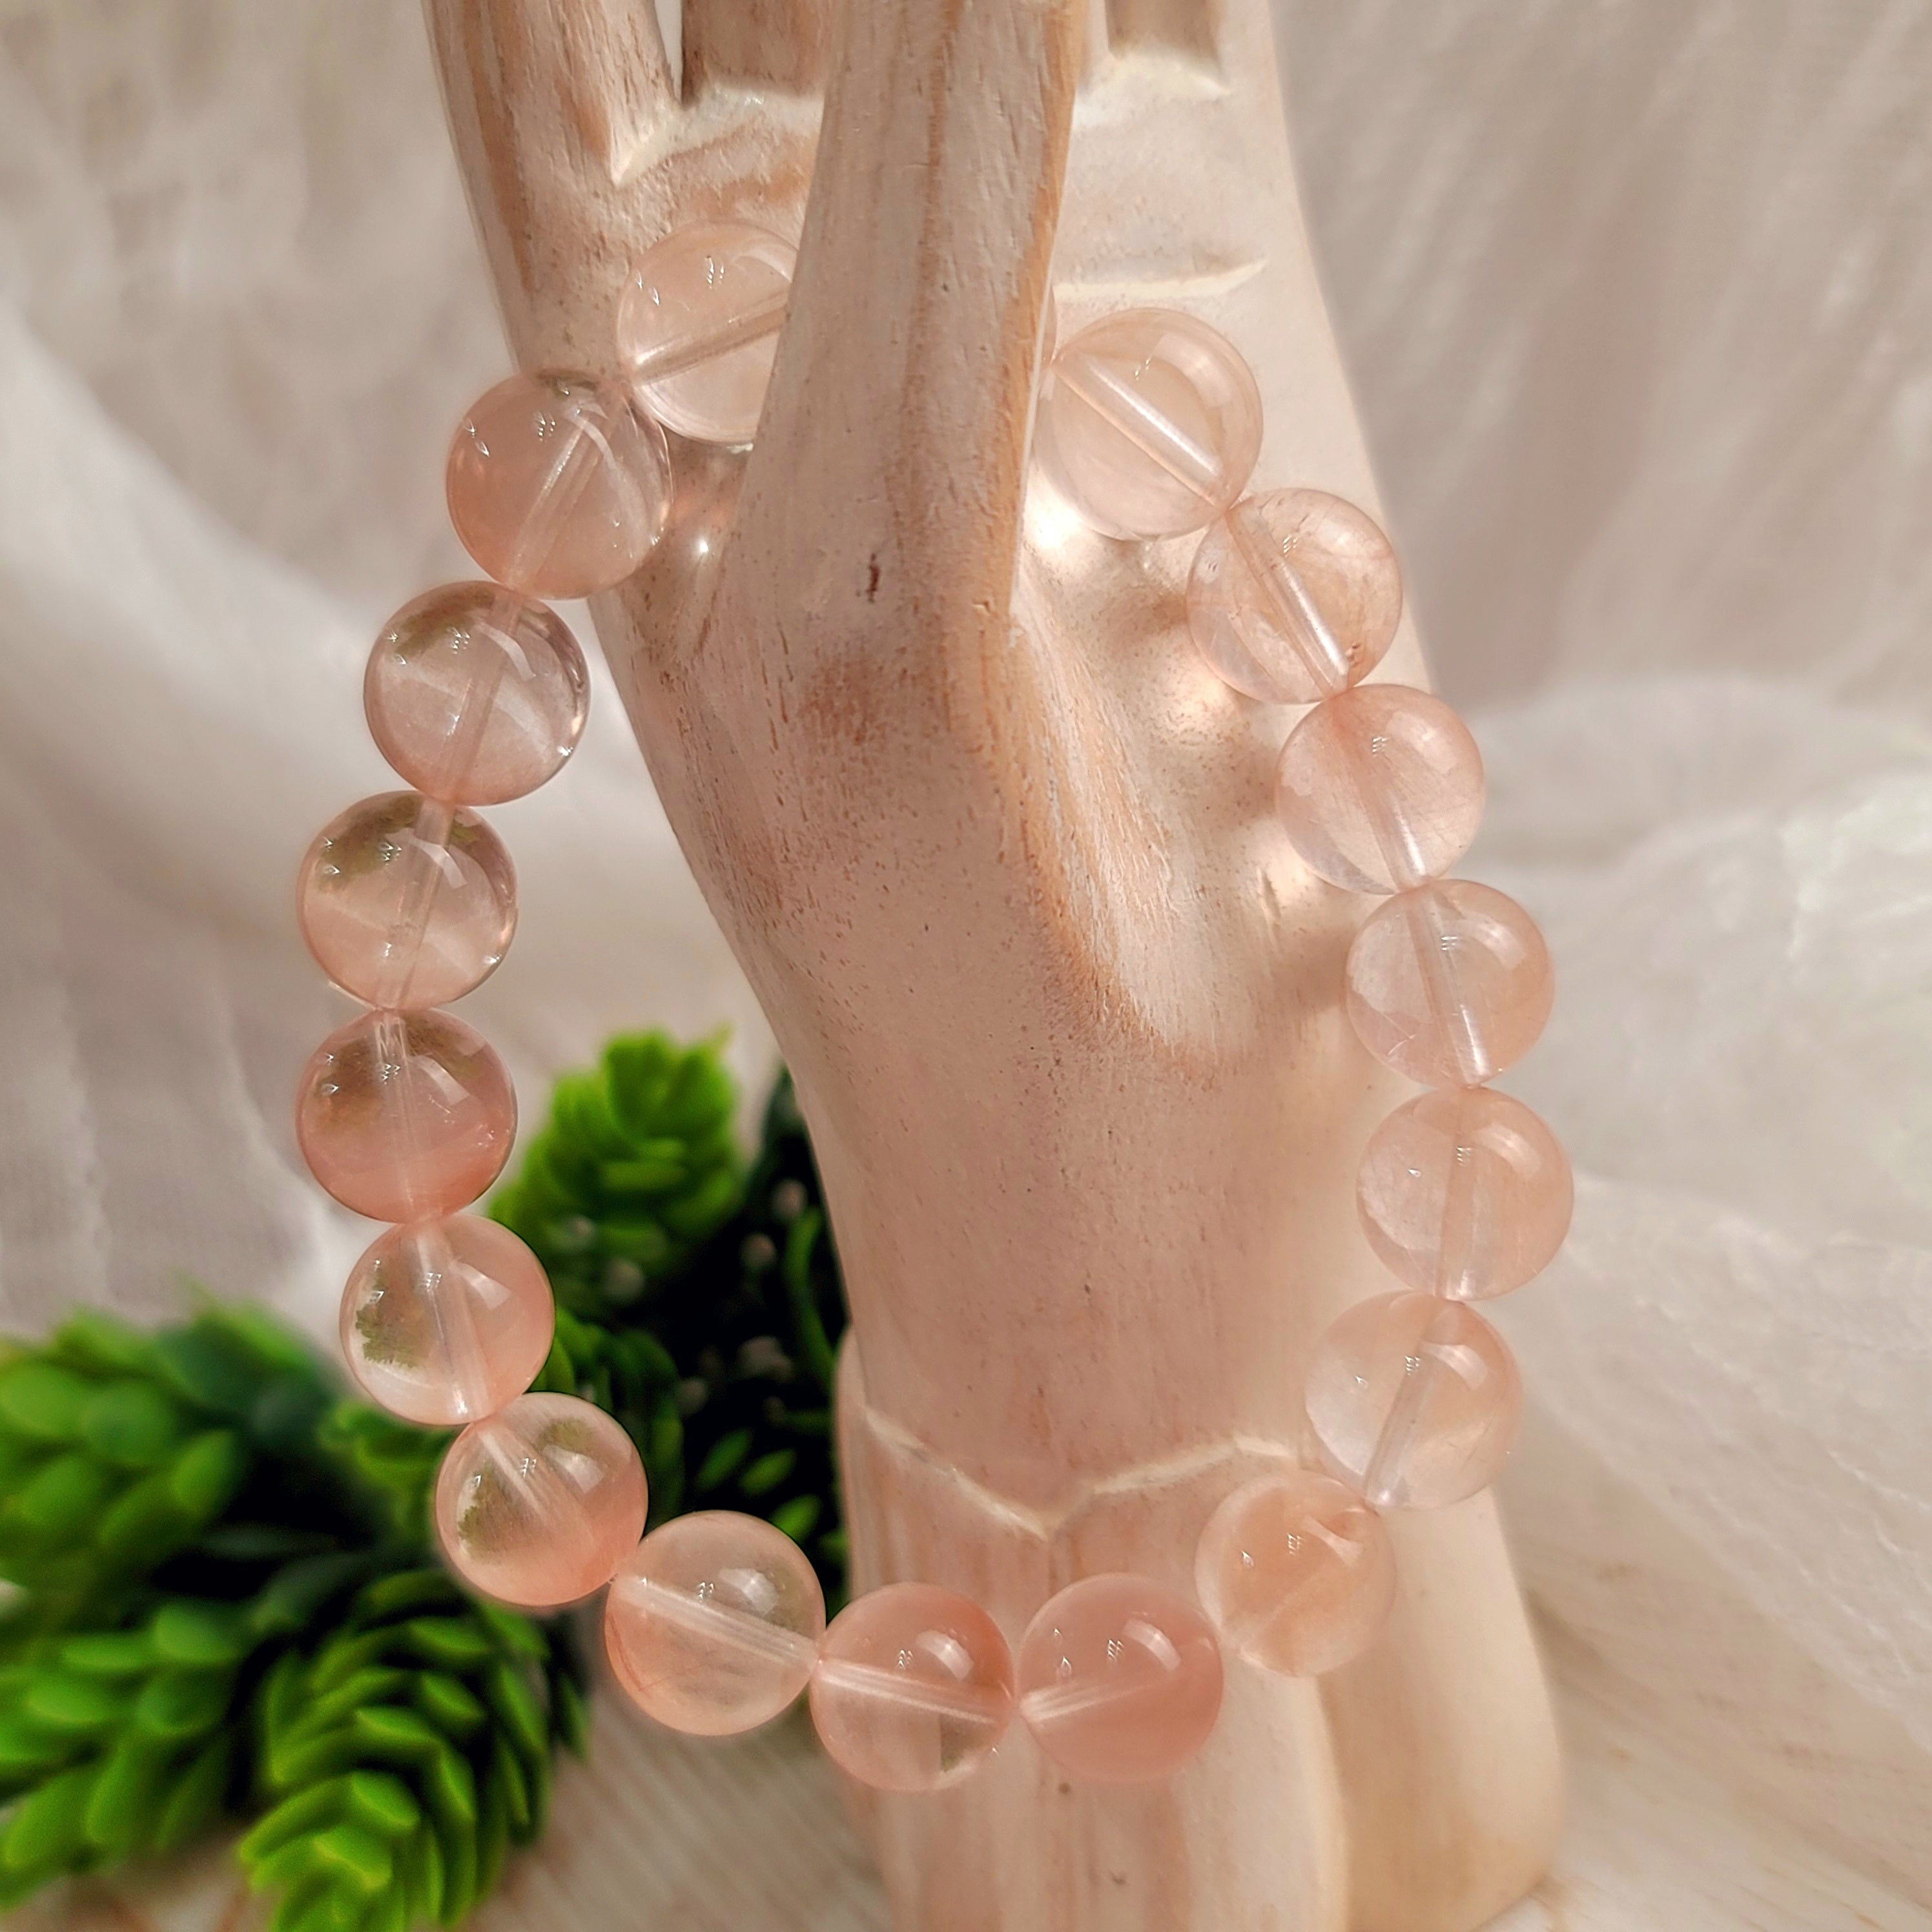 Pink Rutile in Quartz Bracelet (AAA Grade) for Awakening your Spiritual Gifts, Connection with Angels and Ancestors